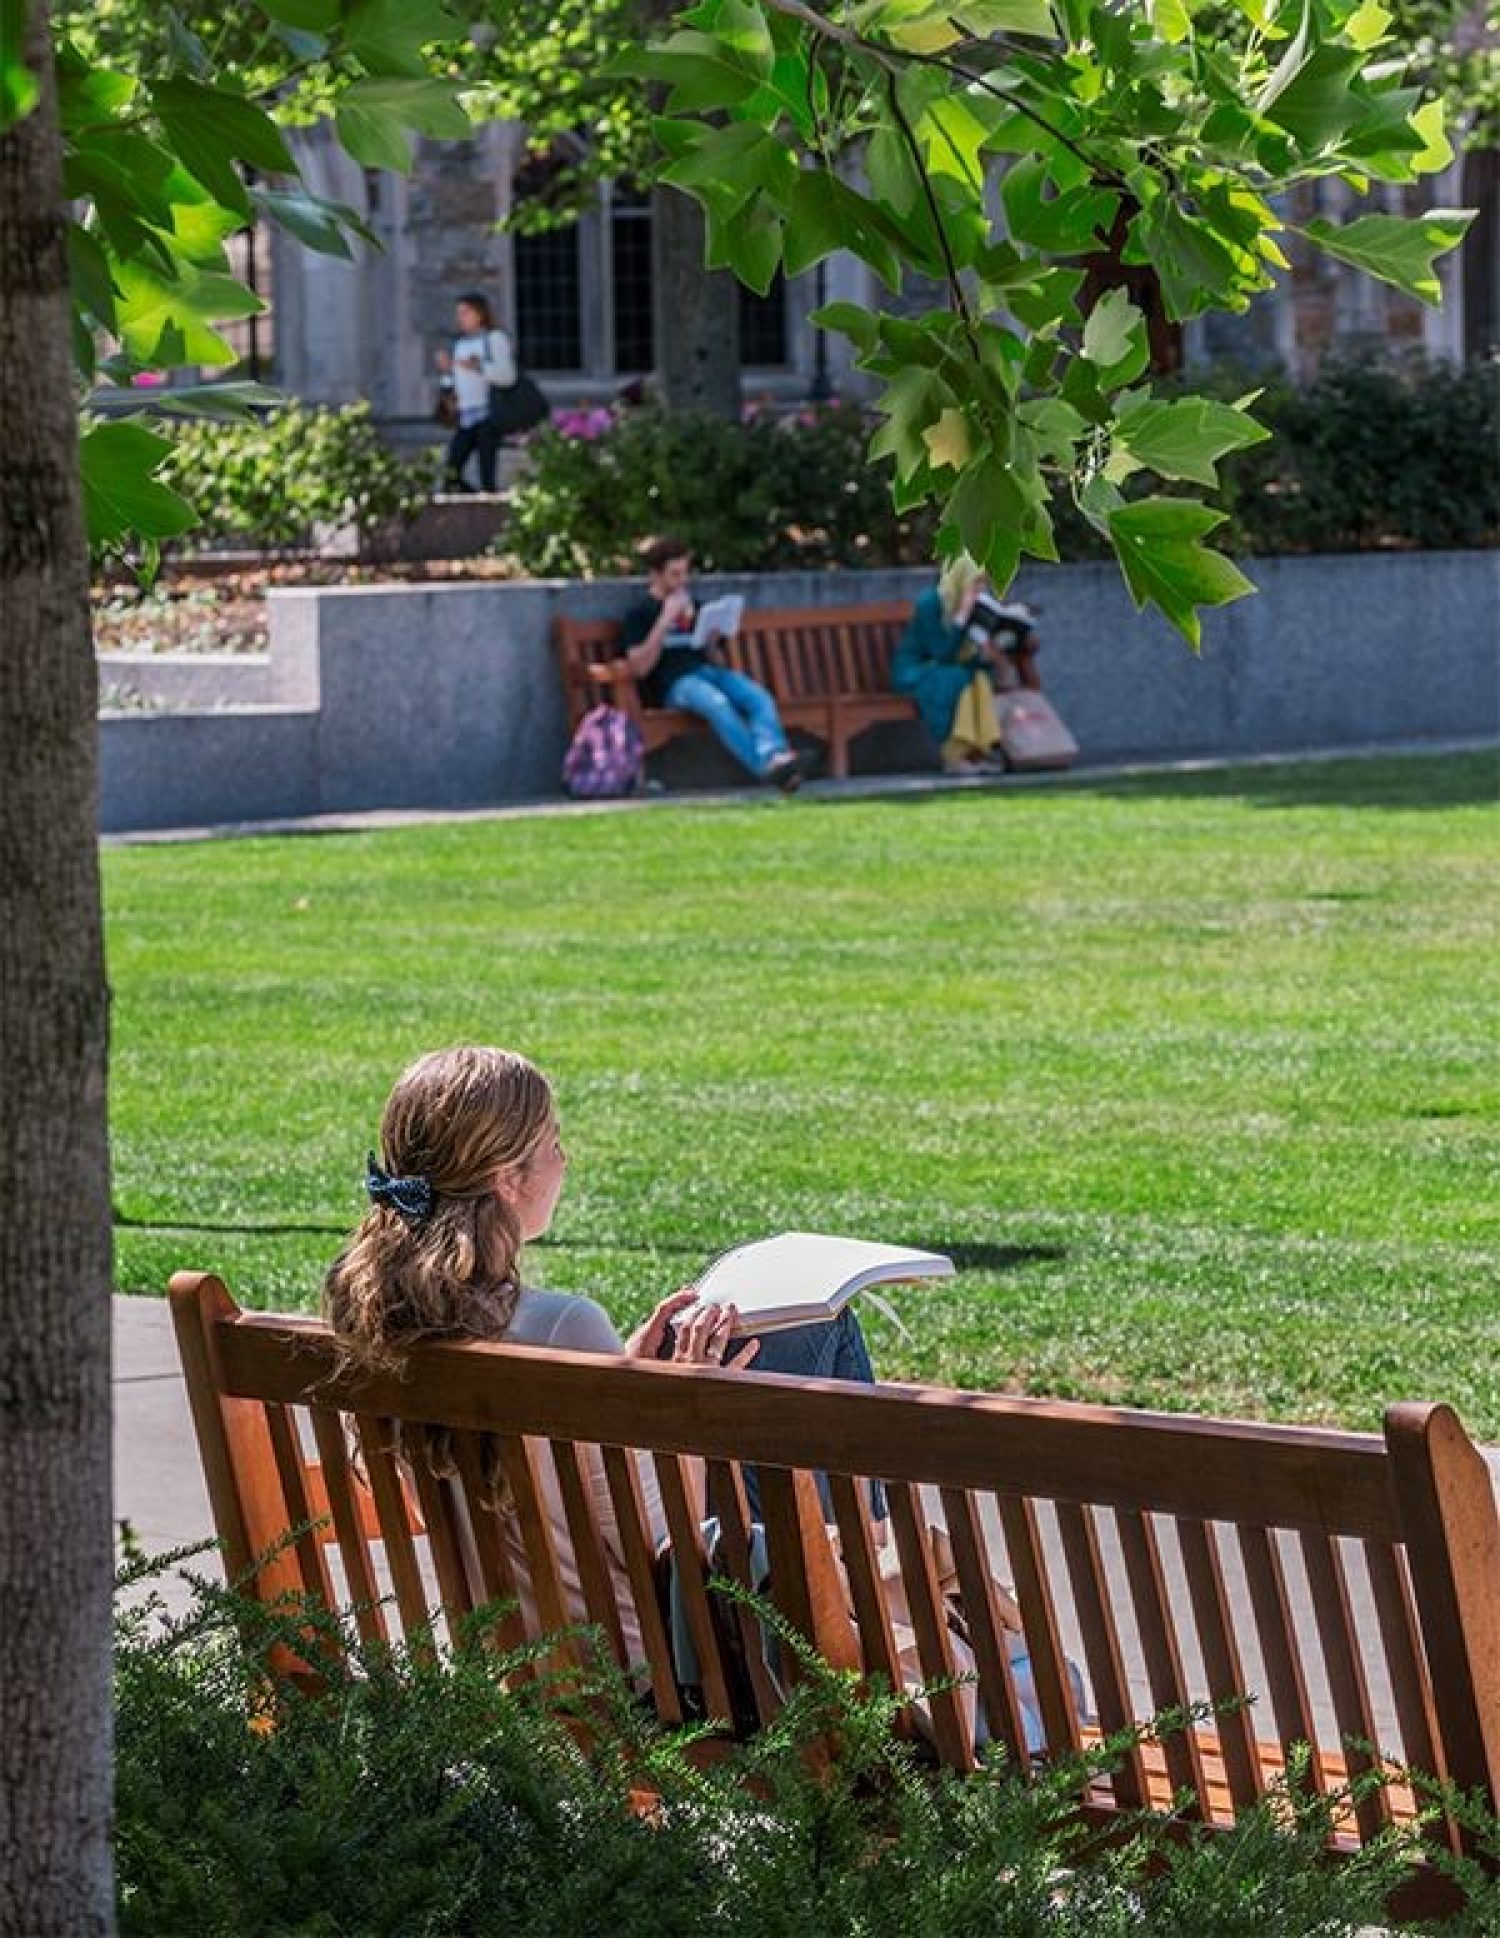 A student sitting on a bench